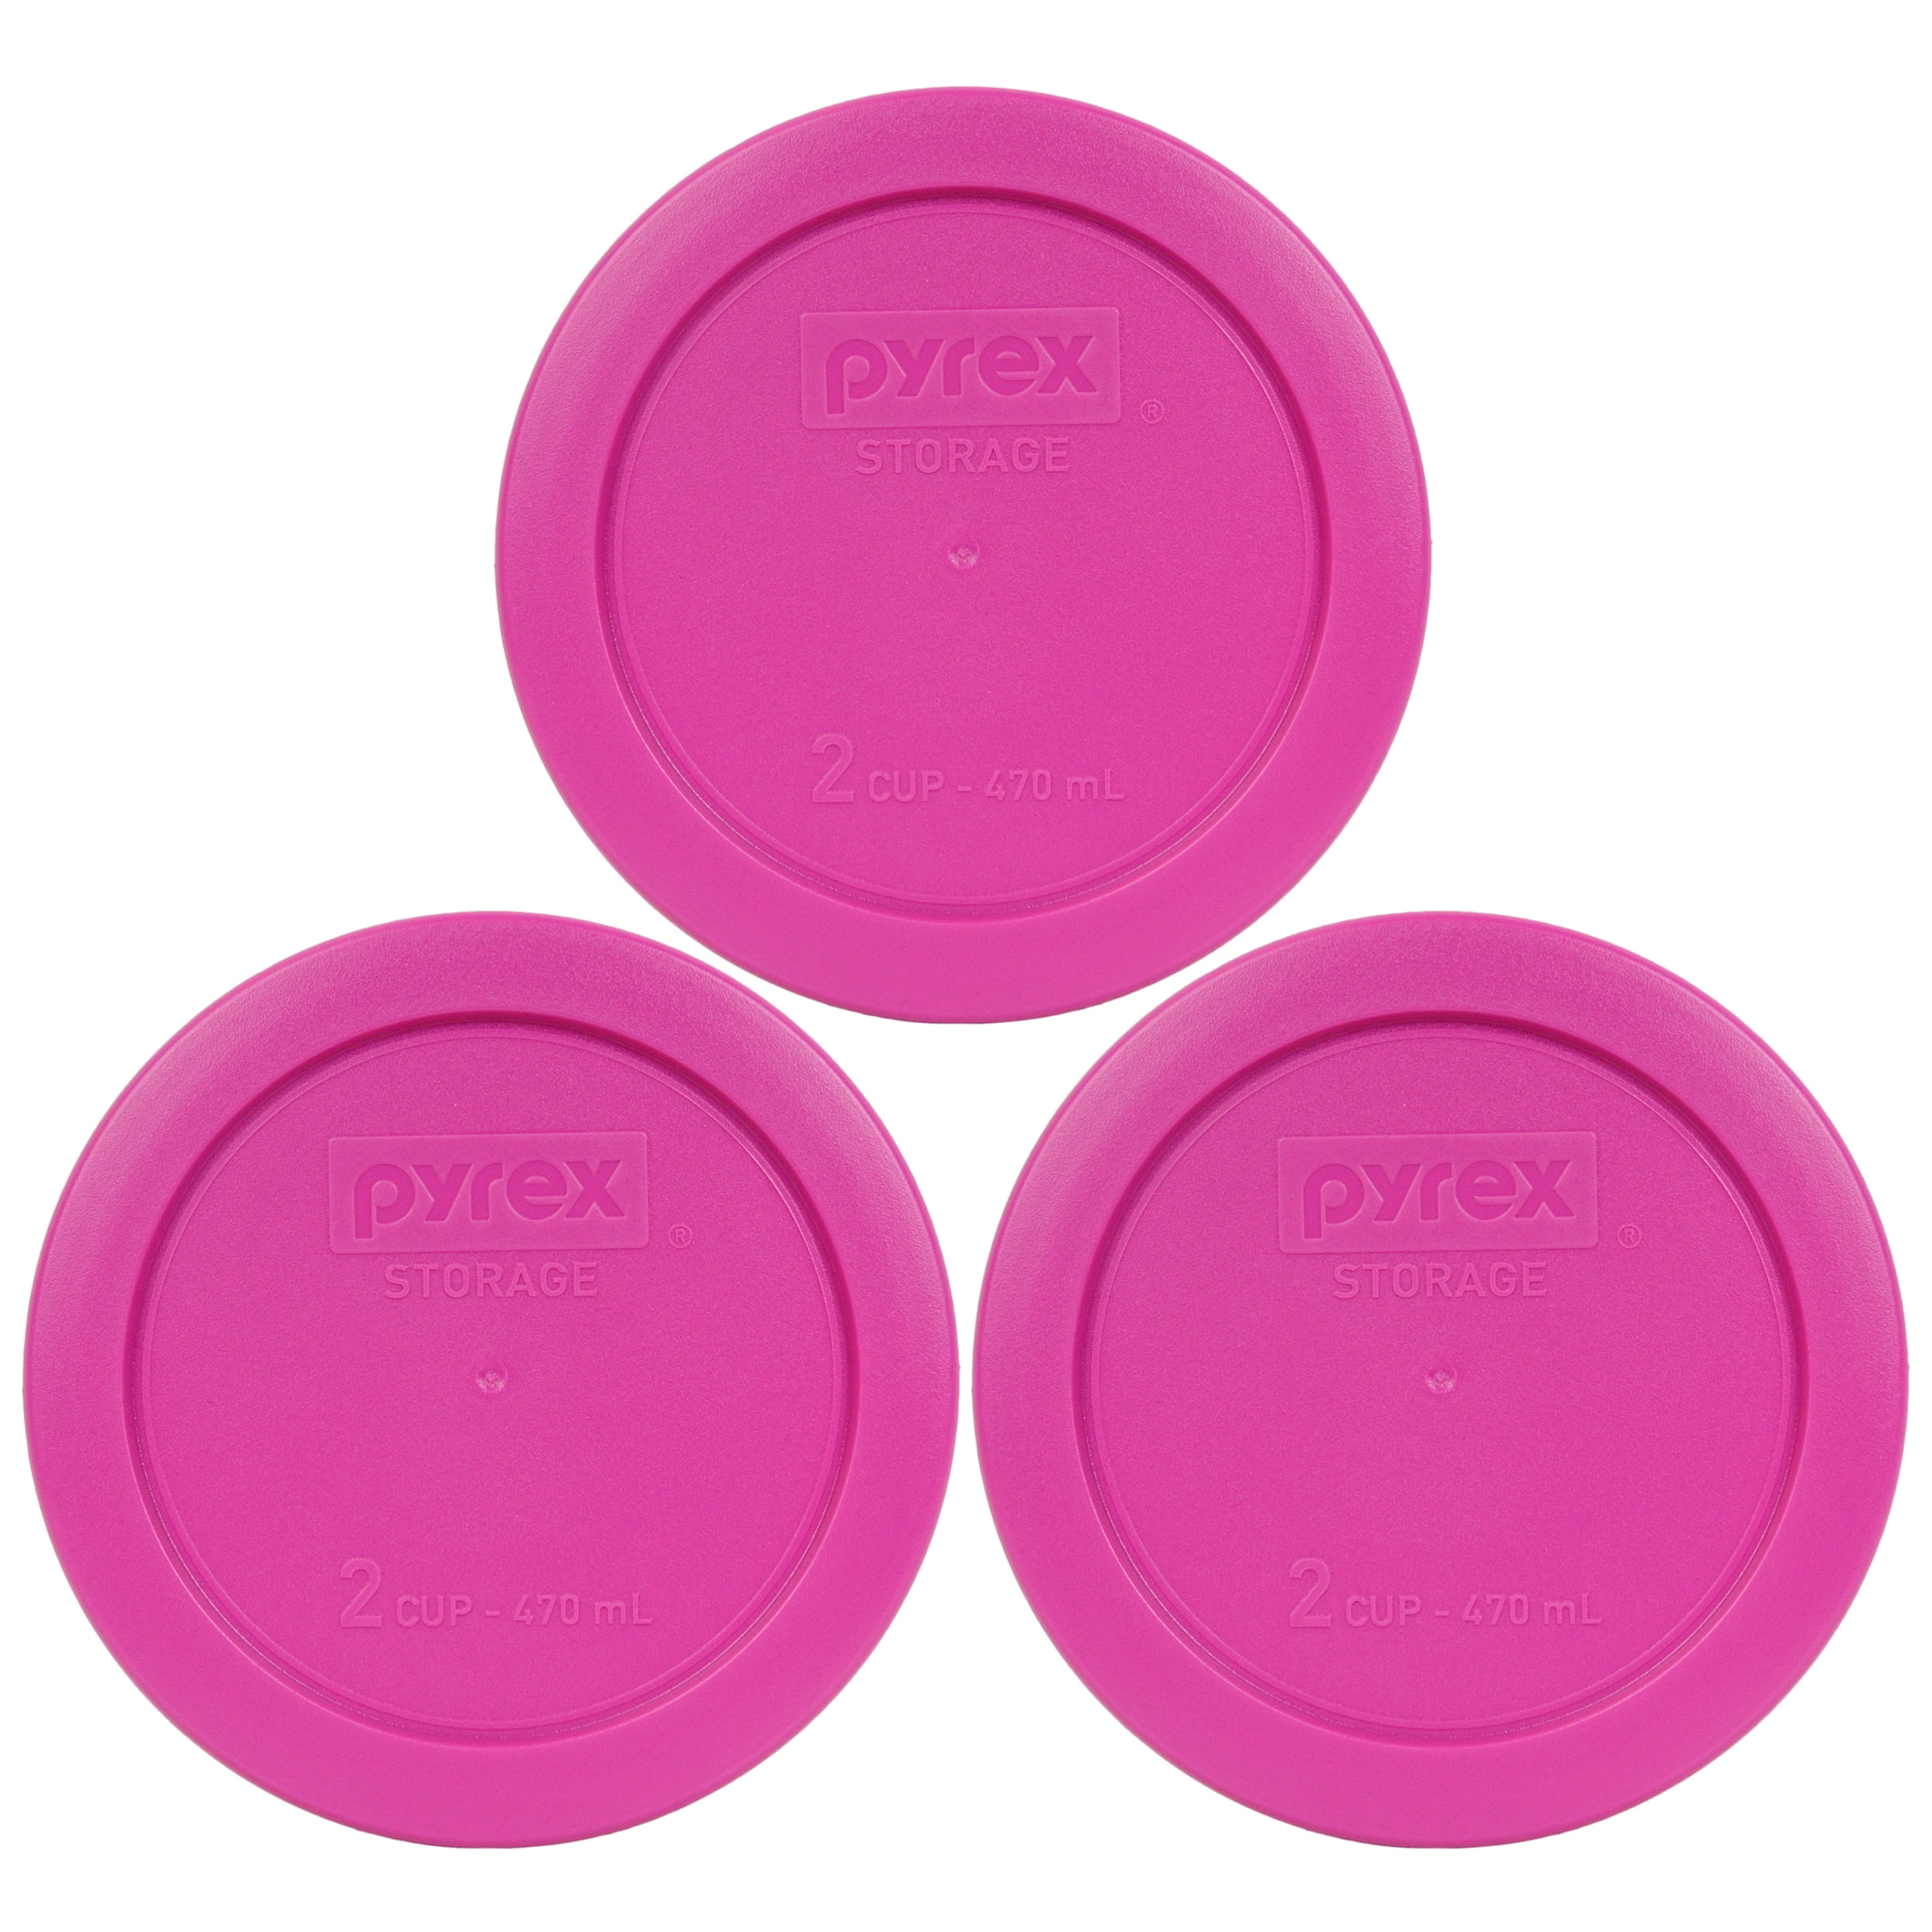 Pyrex 516-RRD-PC 2-Cup Red Measuring Cup Replacement Lid Cover (2-Pack)